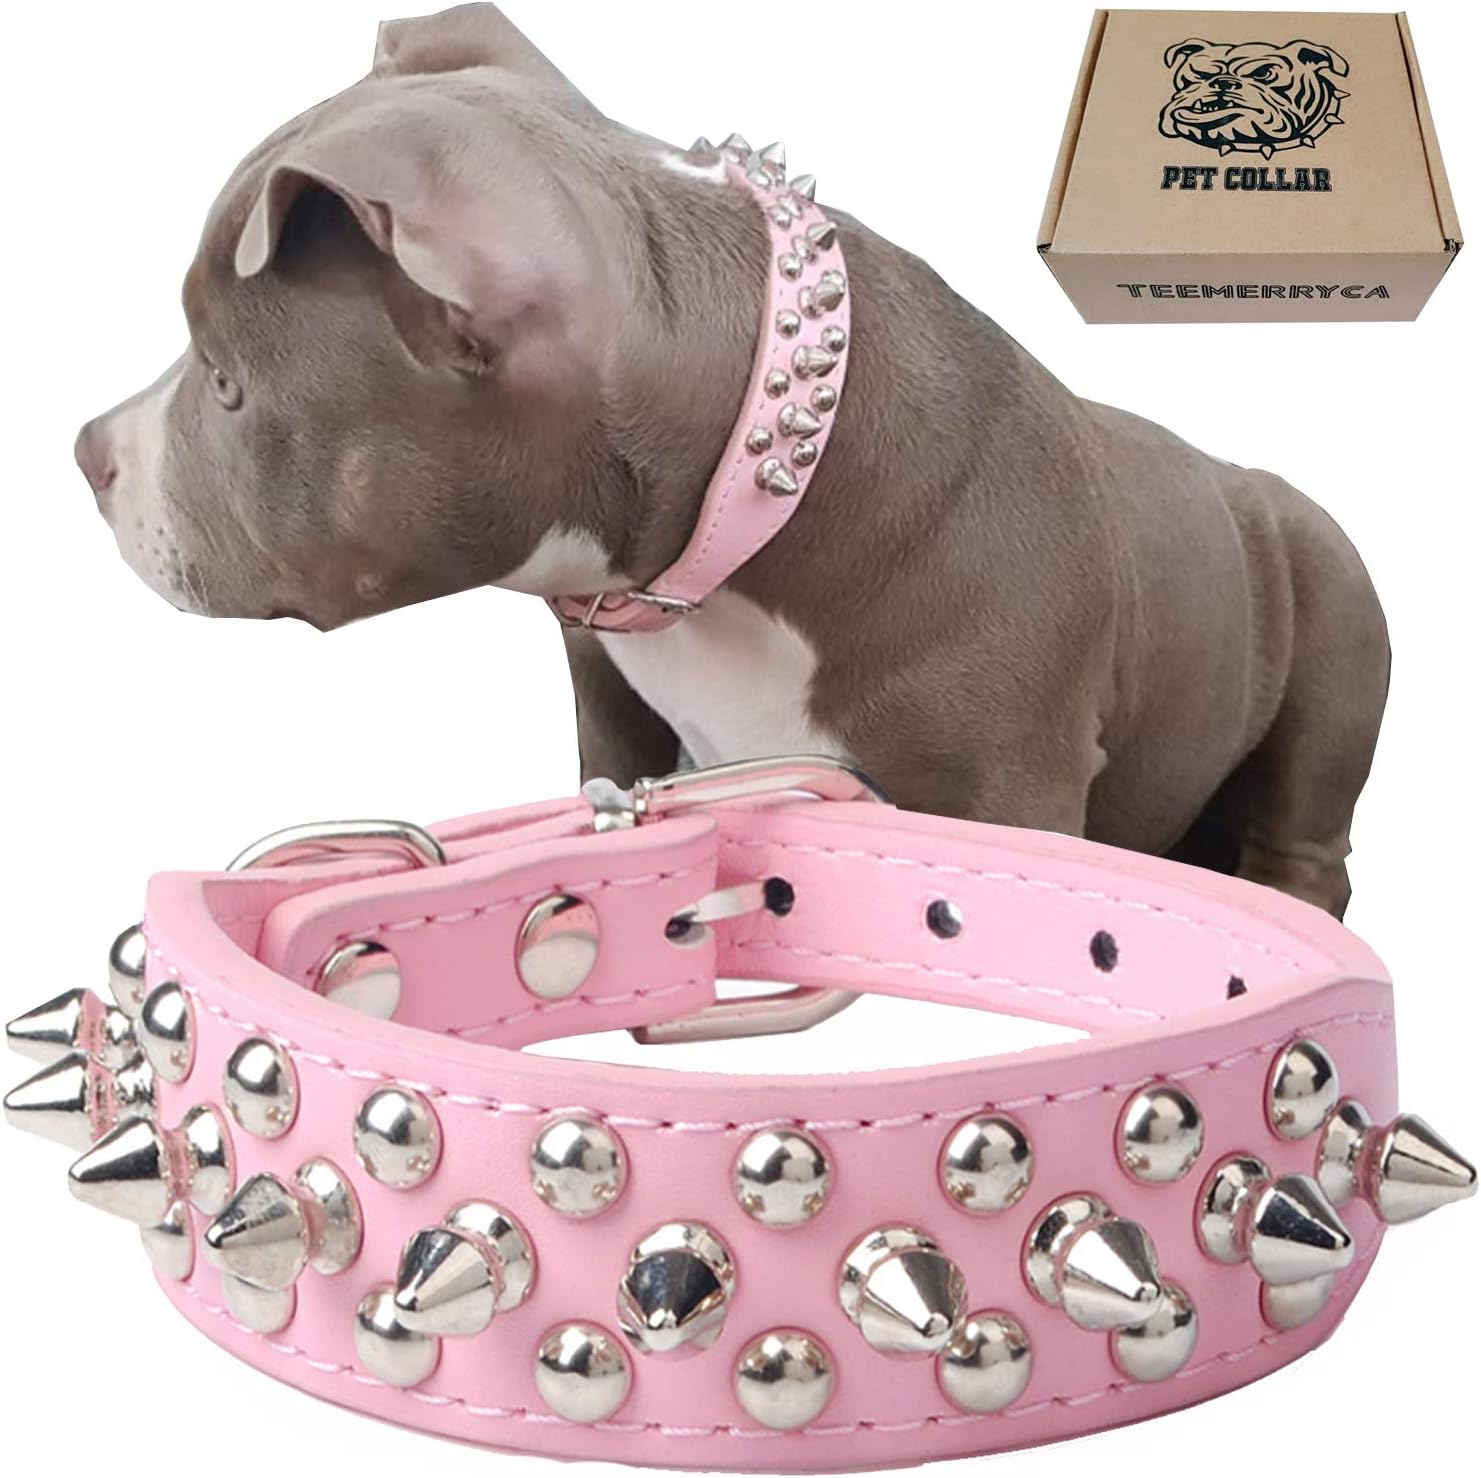 TEEMERRYCA Adjustable Leather Spiked Studded Dog Collars with a Squeak Ball Gift for Small Medium Large Pets Like Cats/Pit Bull/Bulldog/Pugs/Husky, Pink, L(15-18.5)